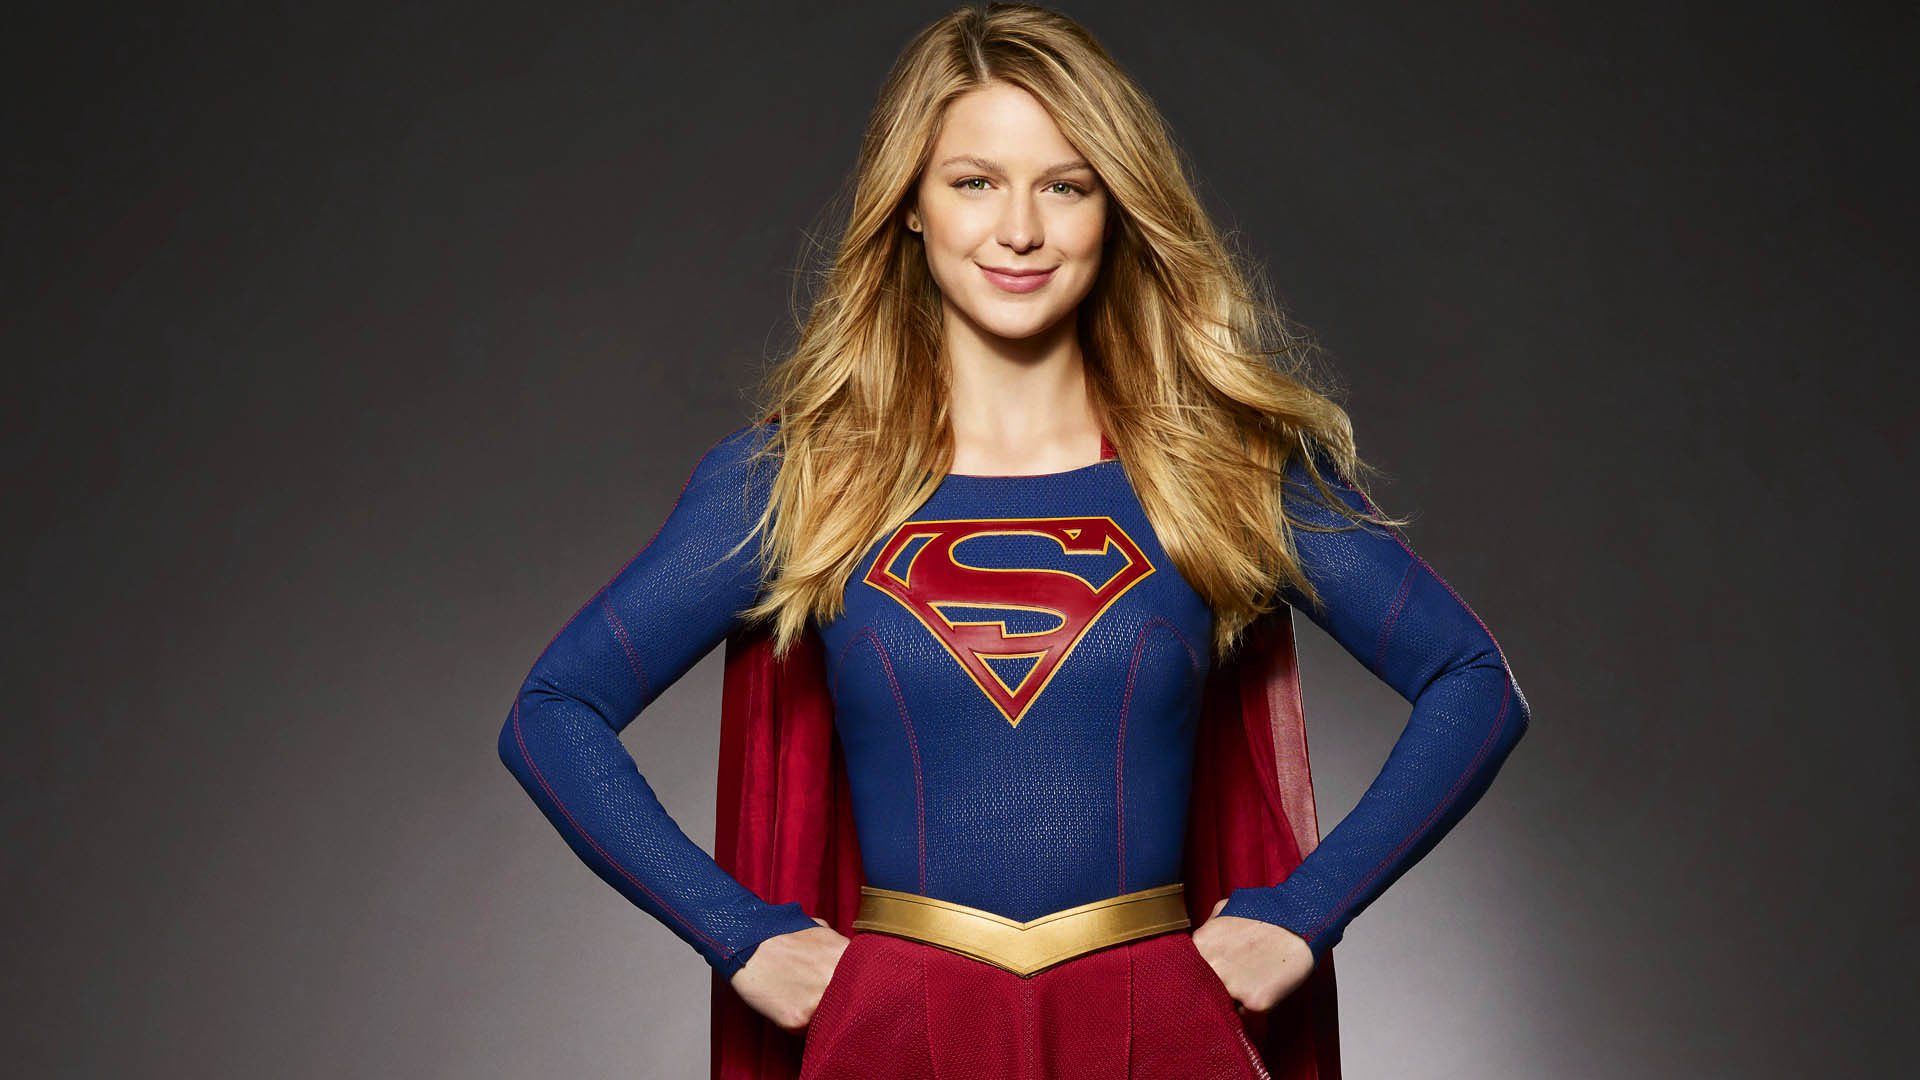 Cw’s ‘supergirl’ is casting superman for s2